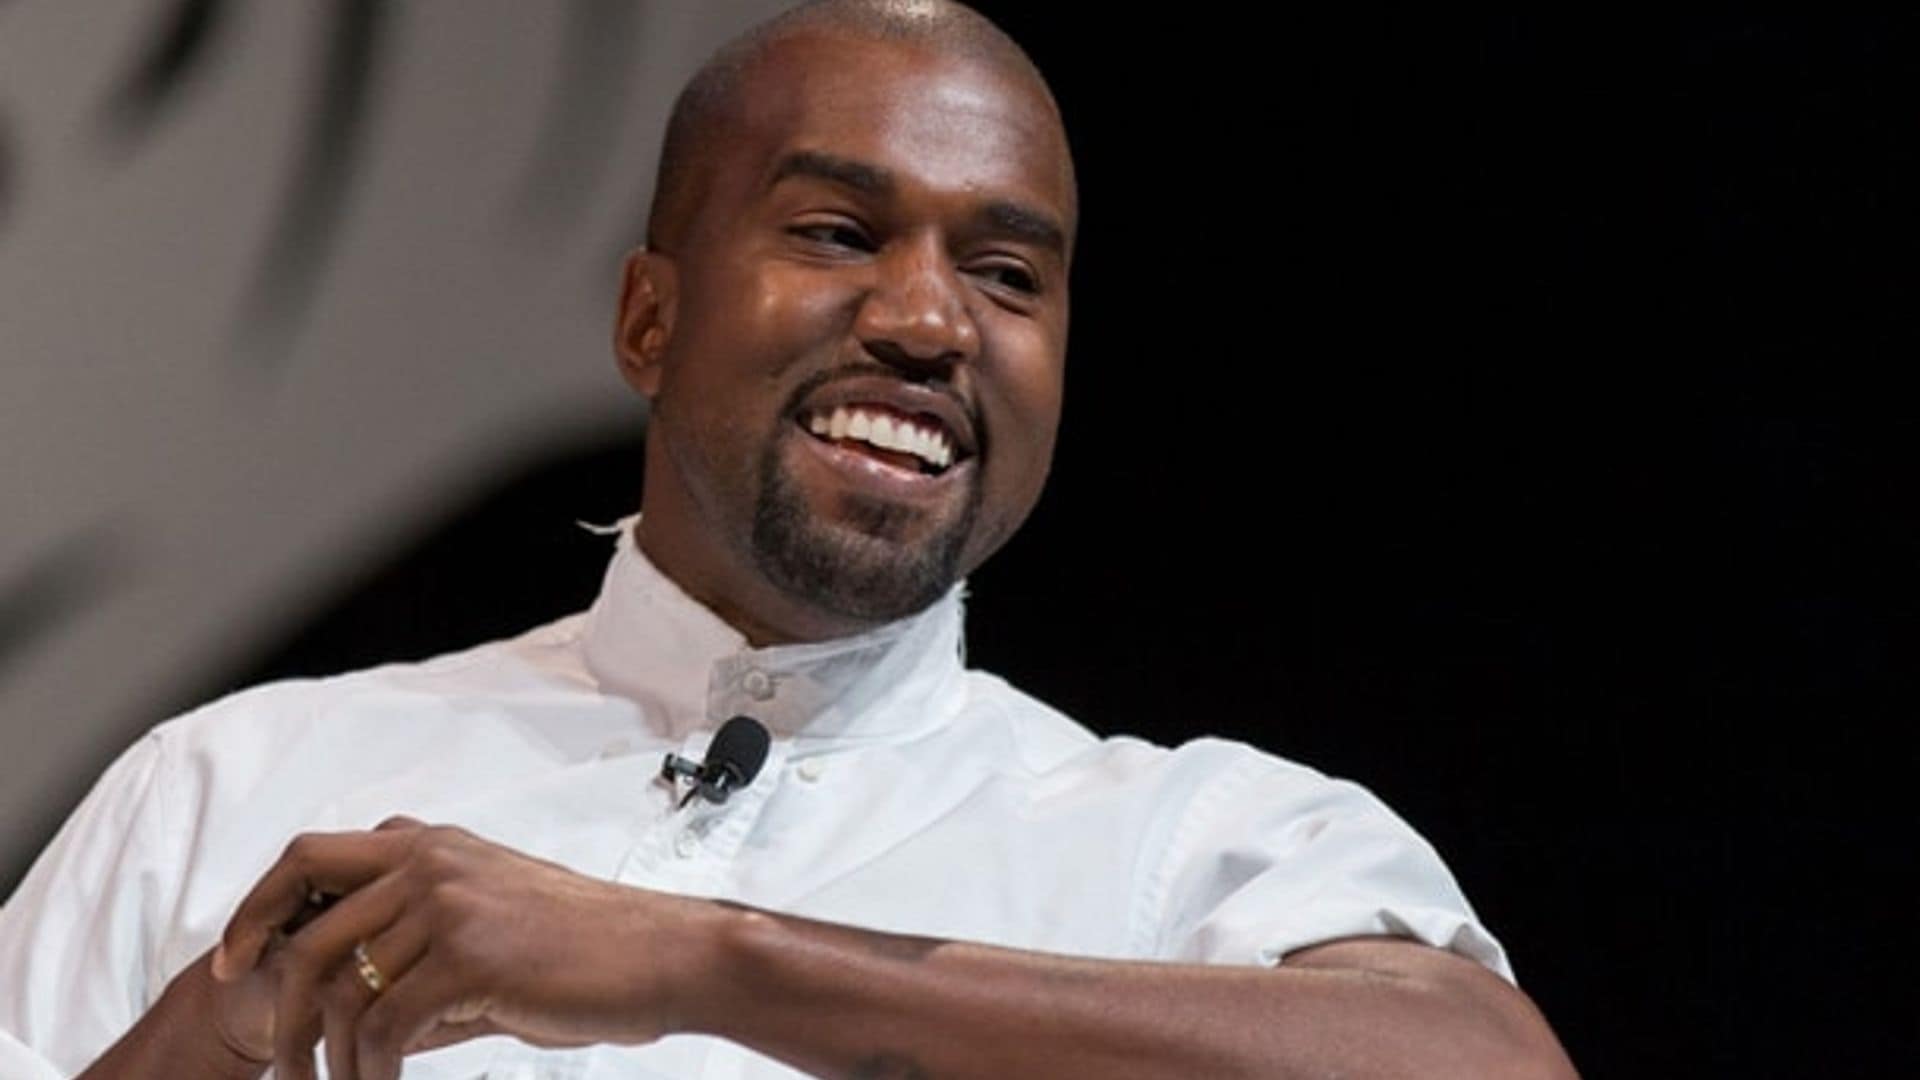 Kanye West's most outrageous quotes